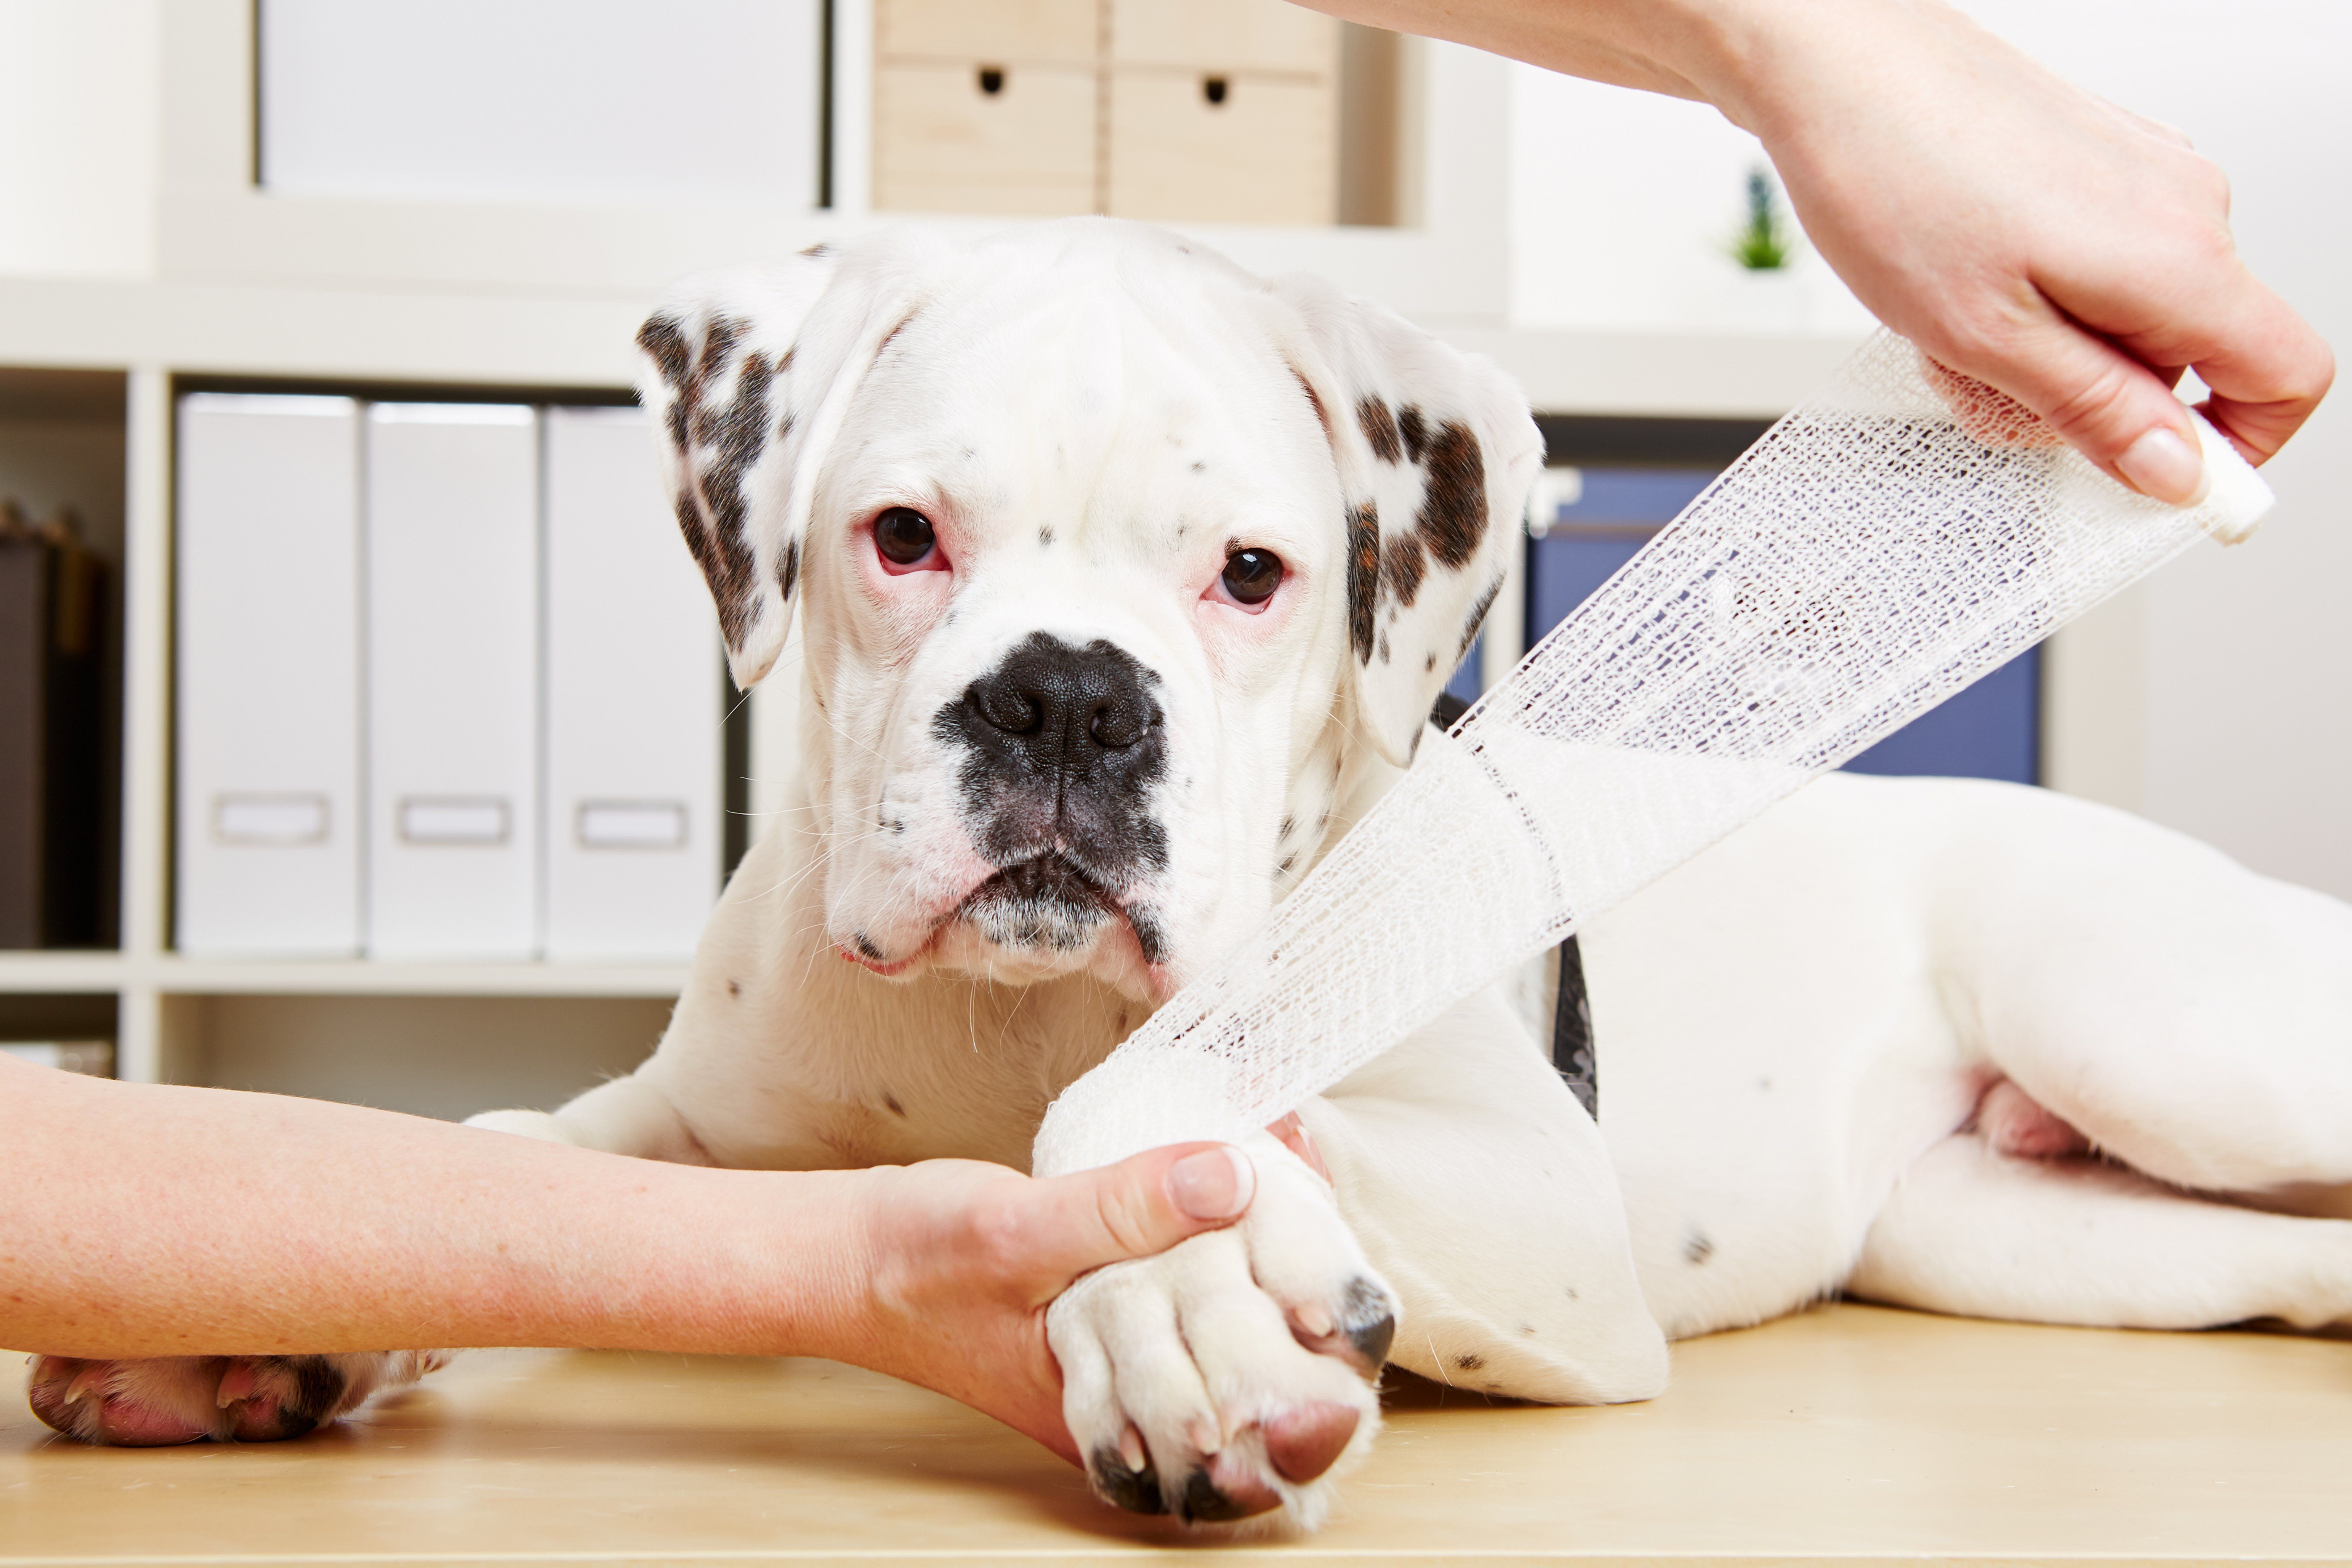 What to do if you find an injured pet